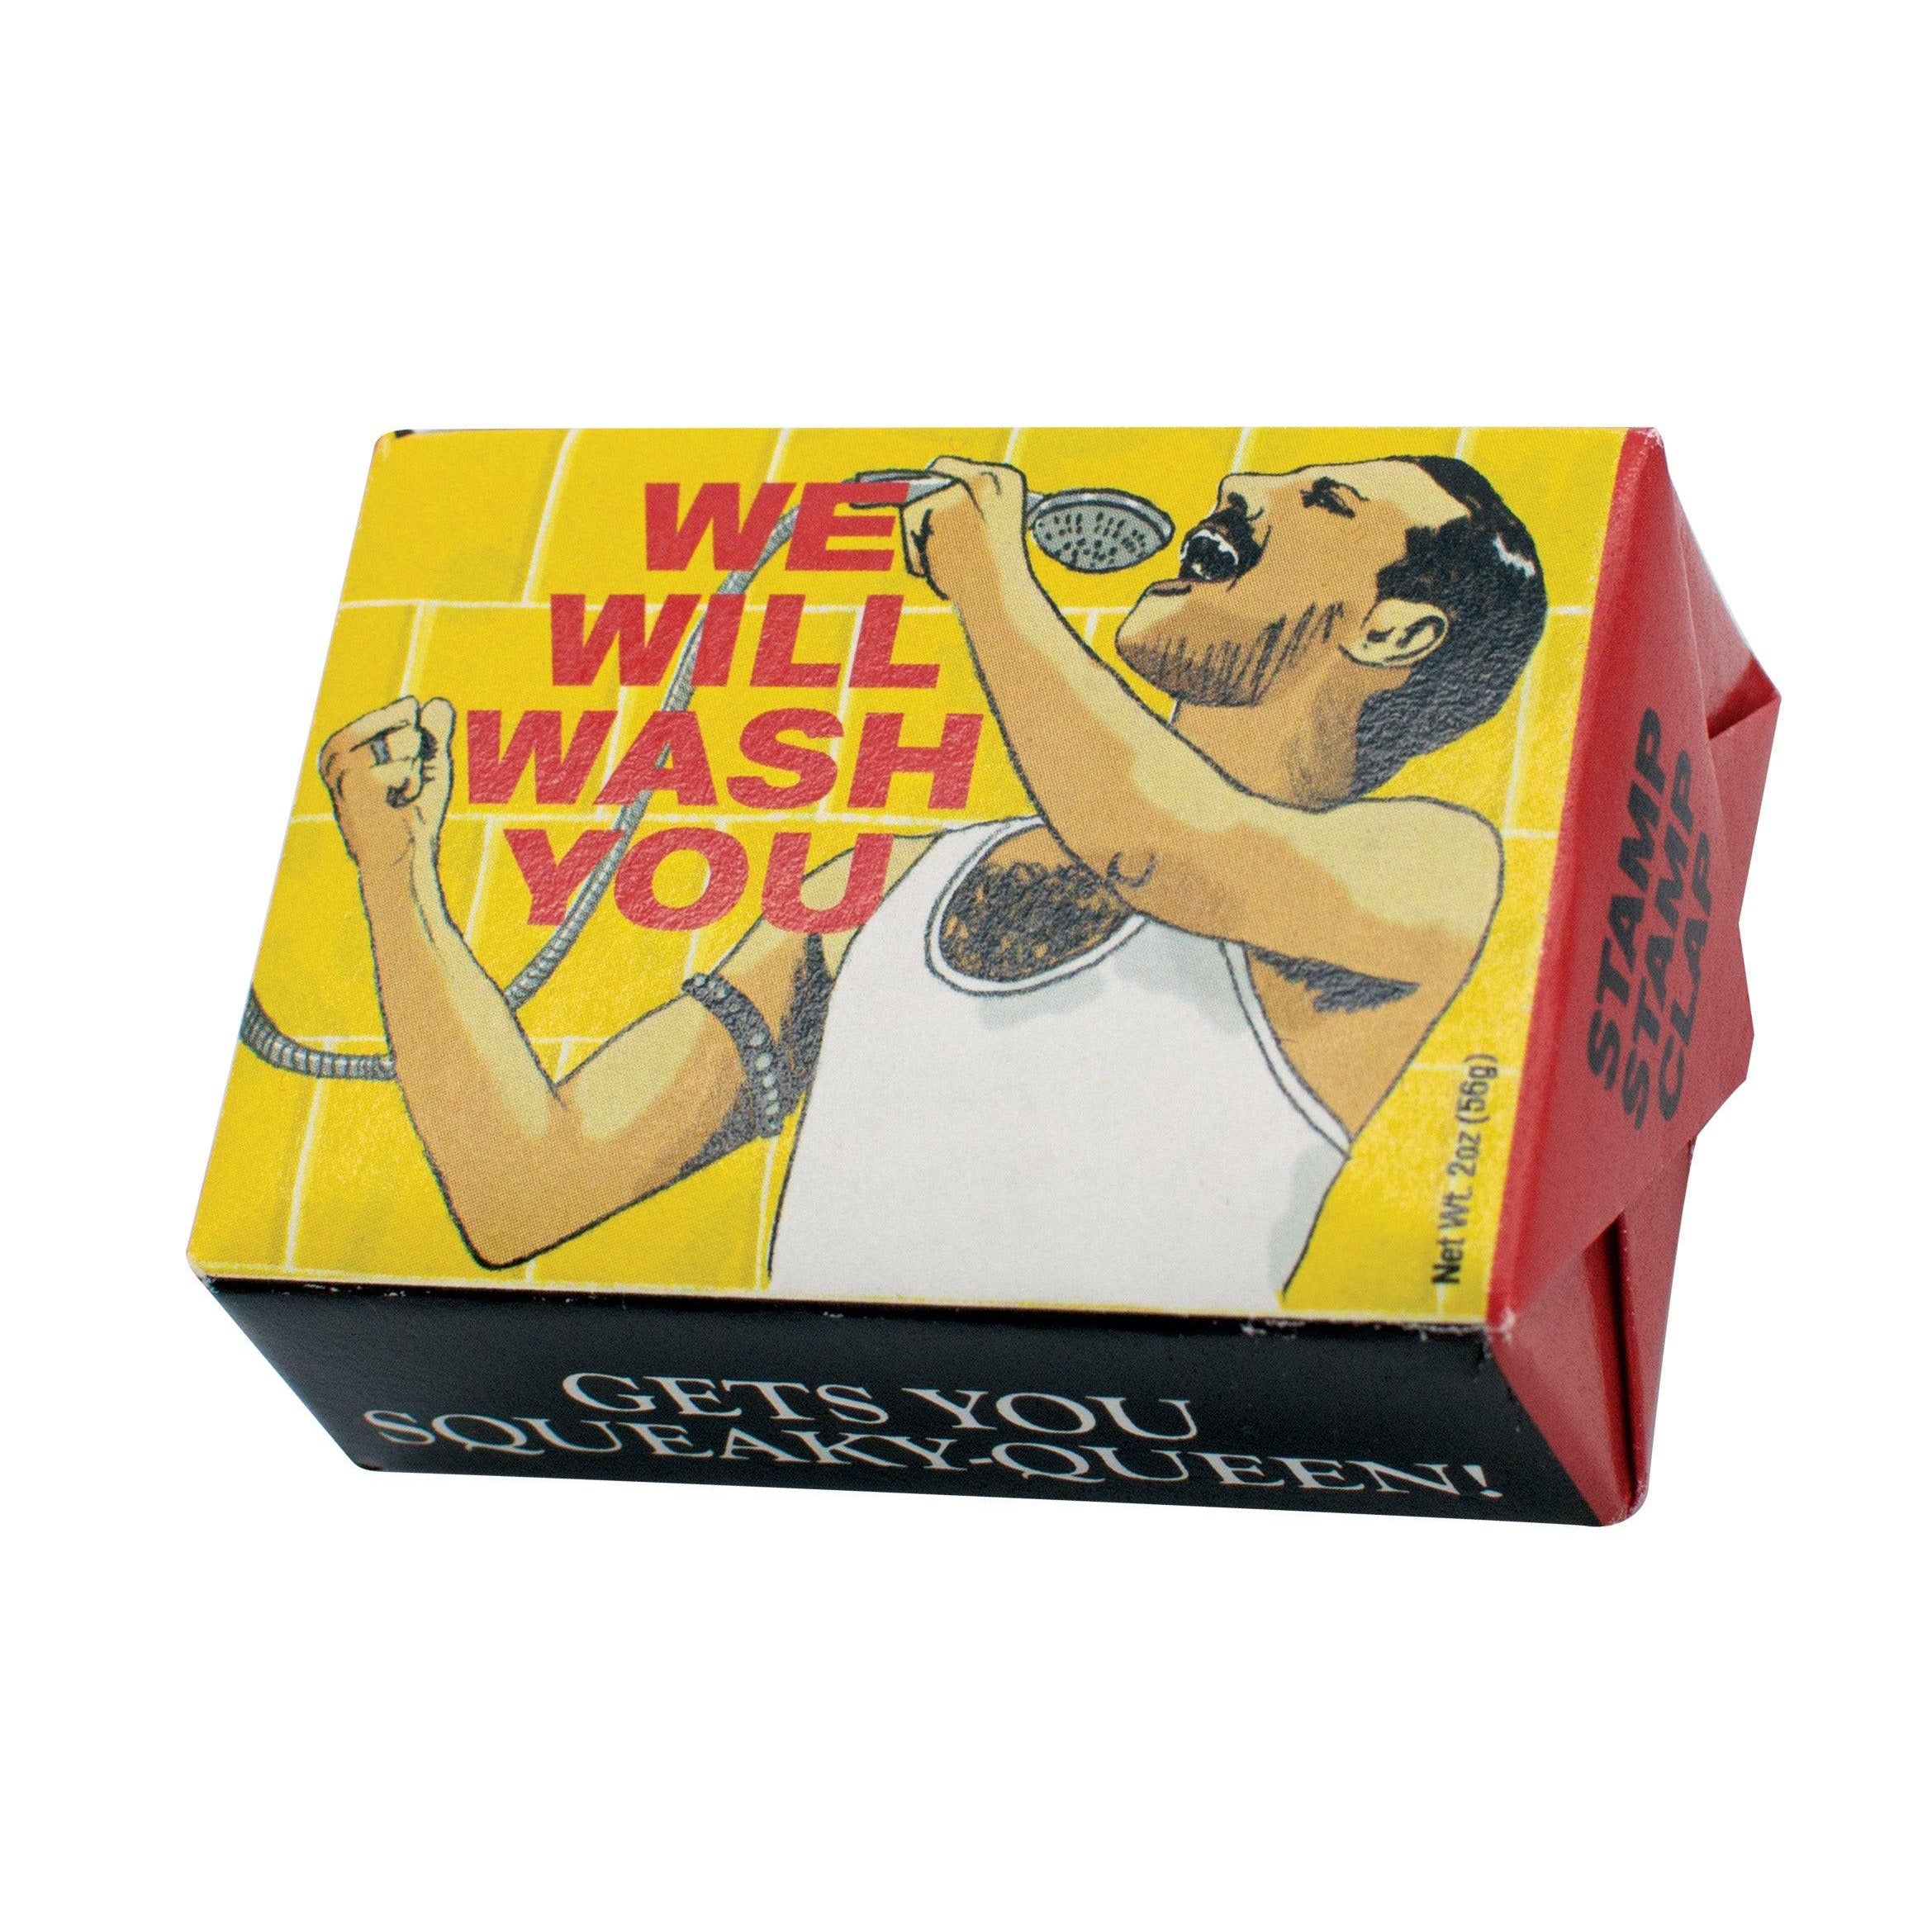 We Will Wash You (Freddie Mercury) Soap, white background in packaging